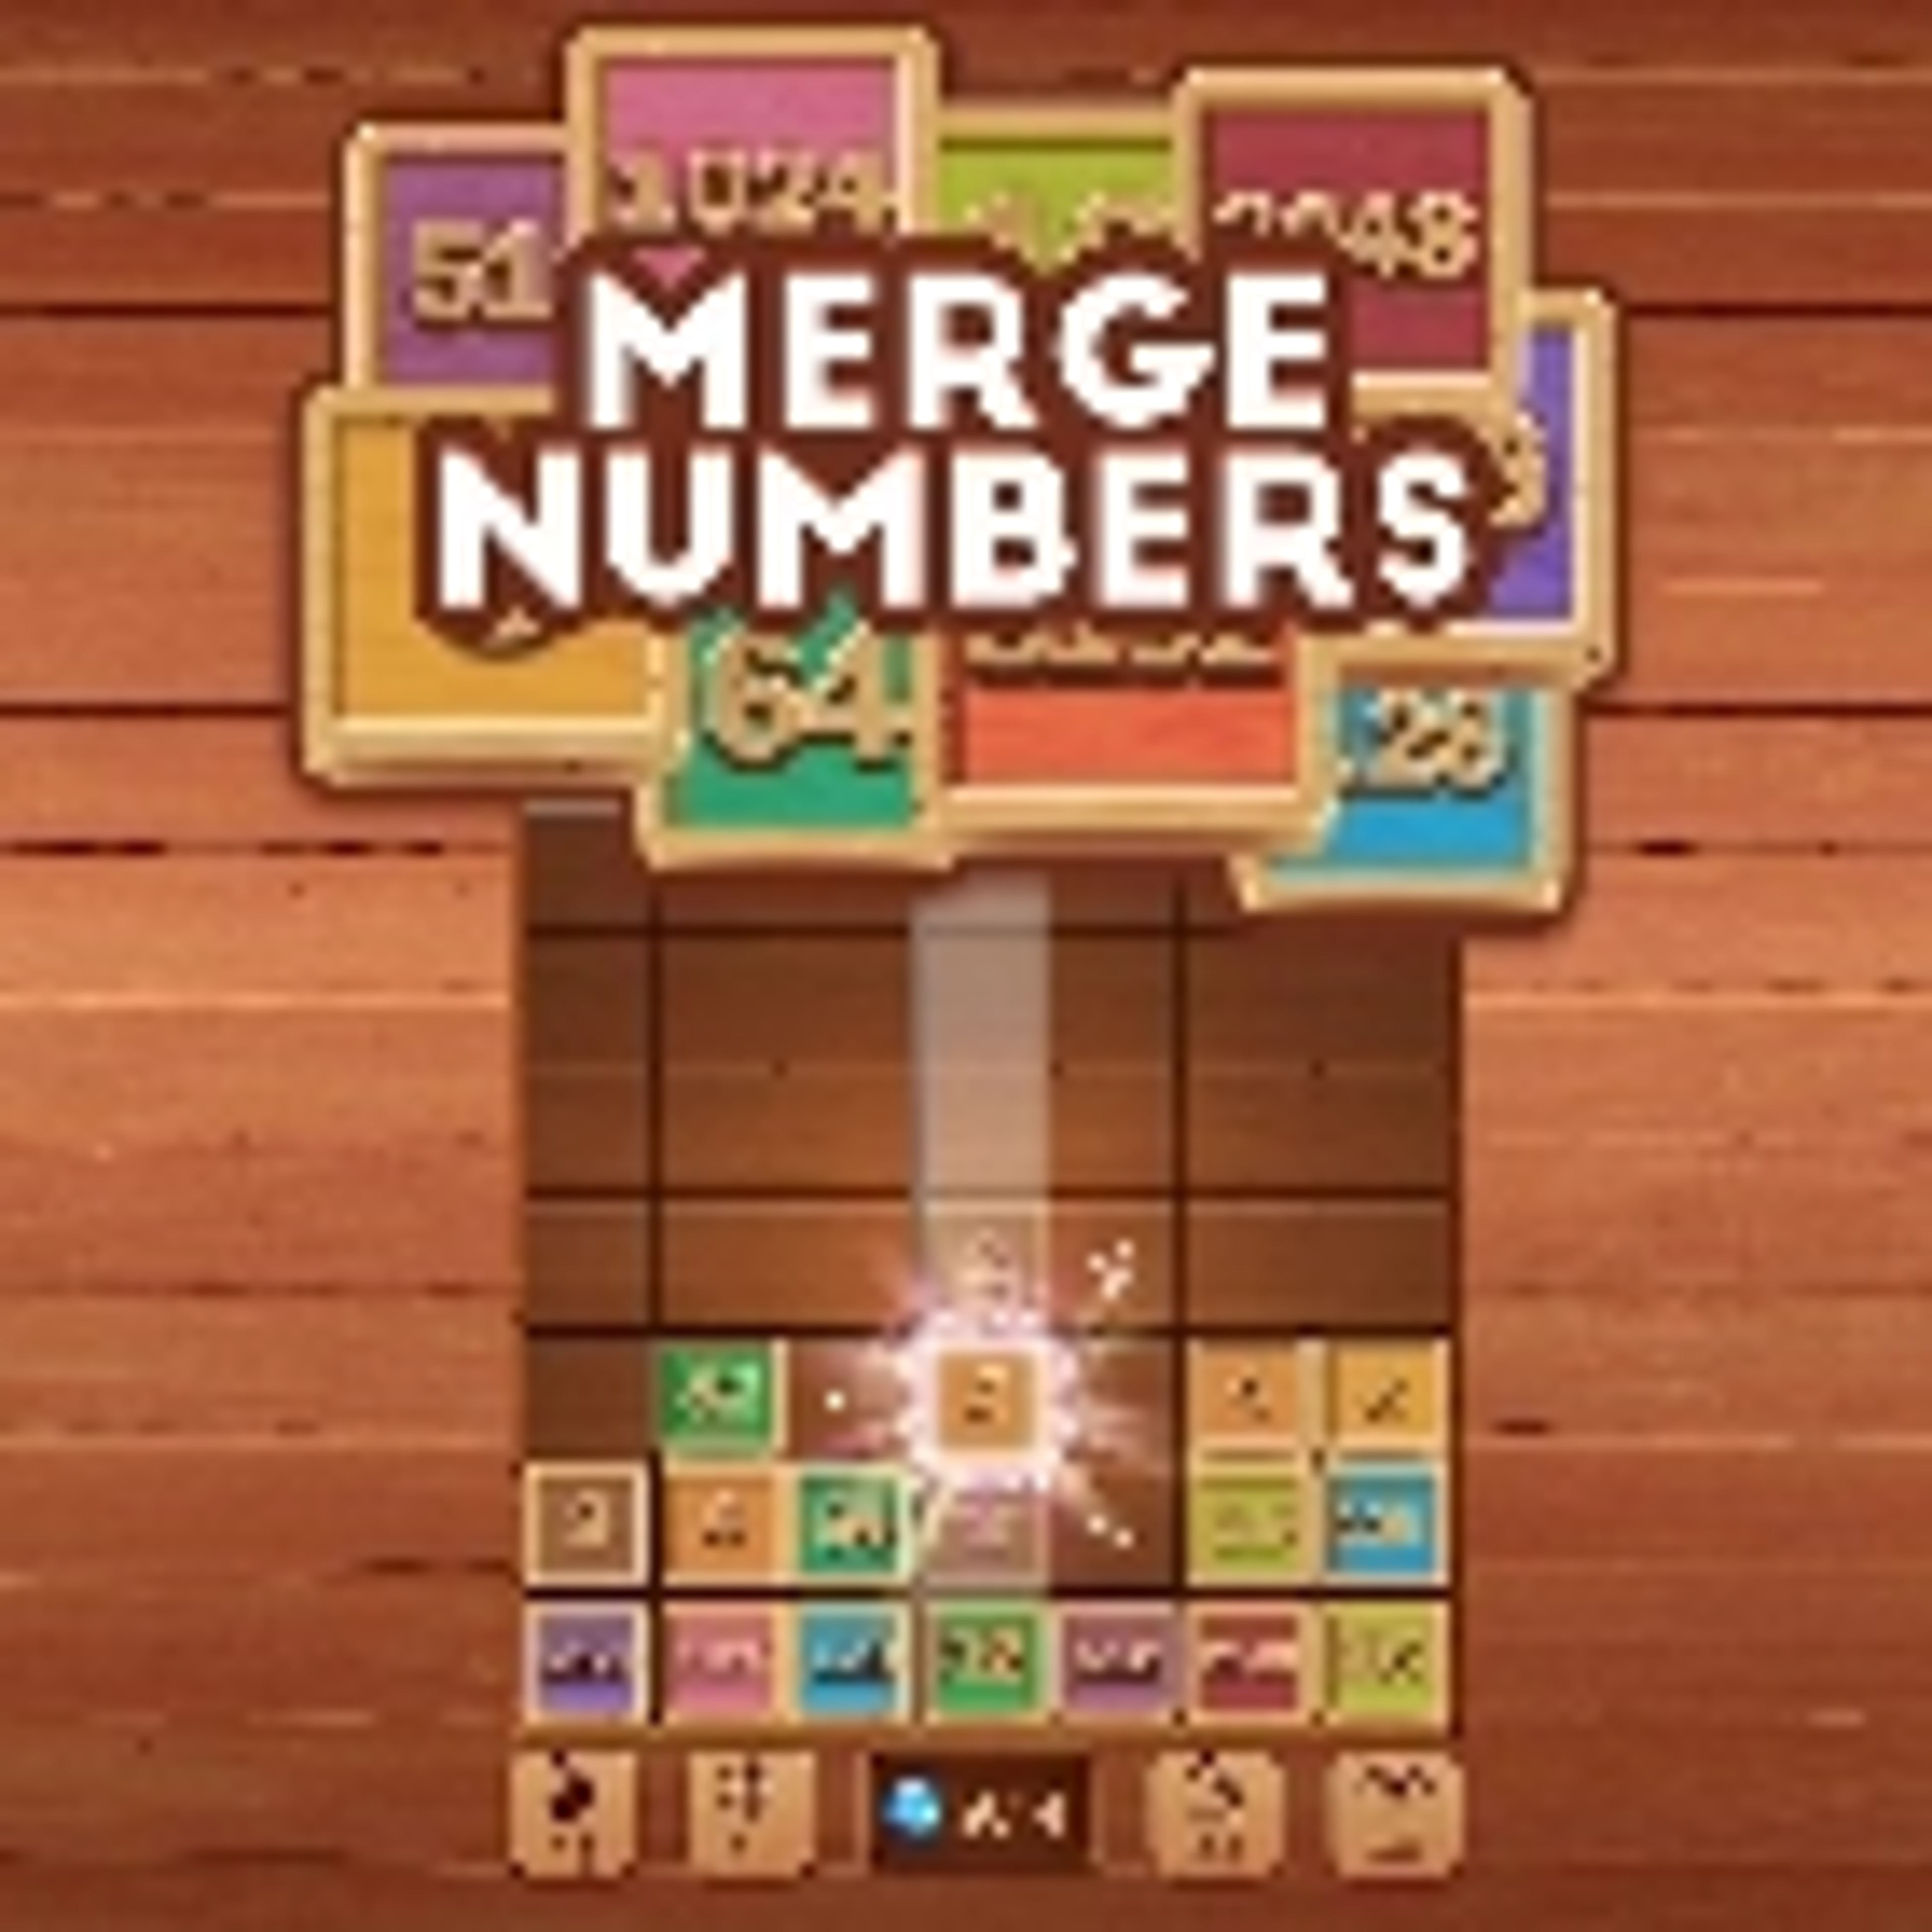 Merge Numbers Wooden edition